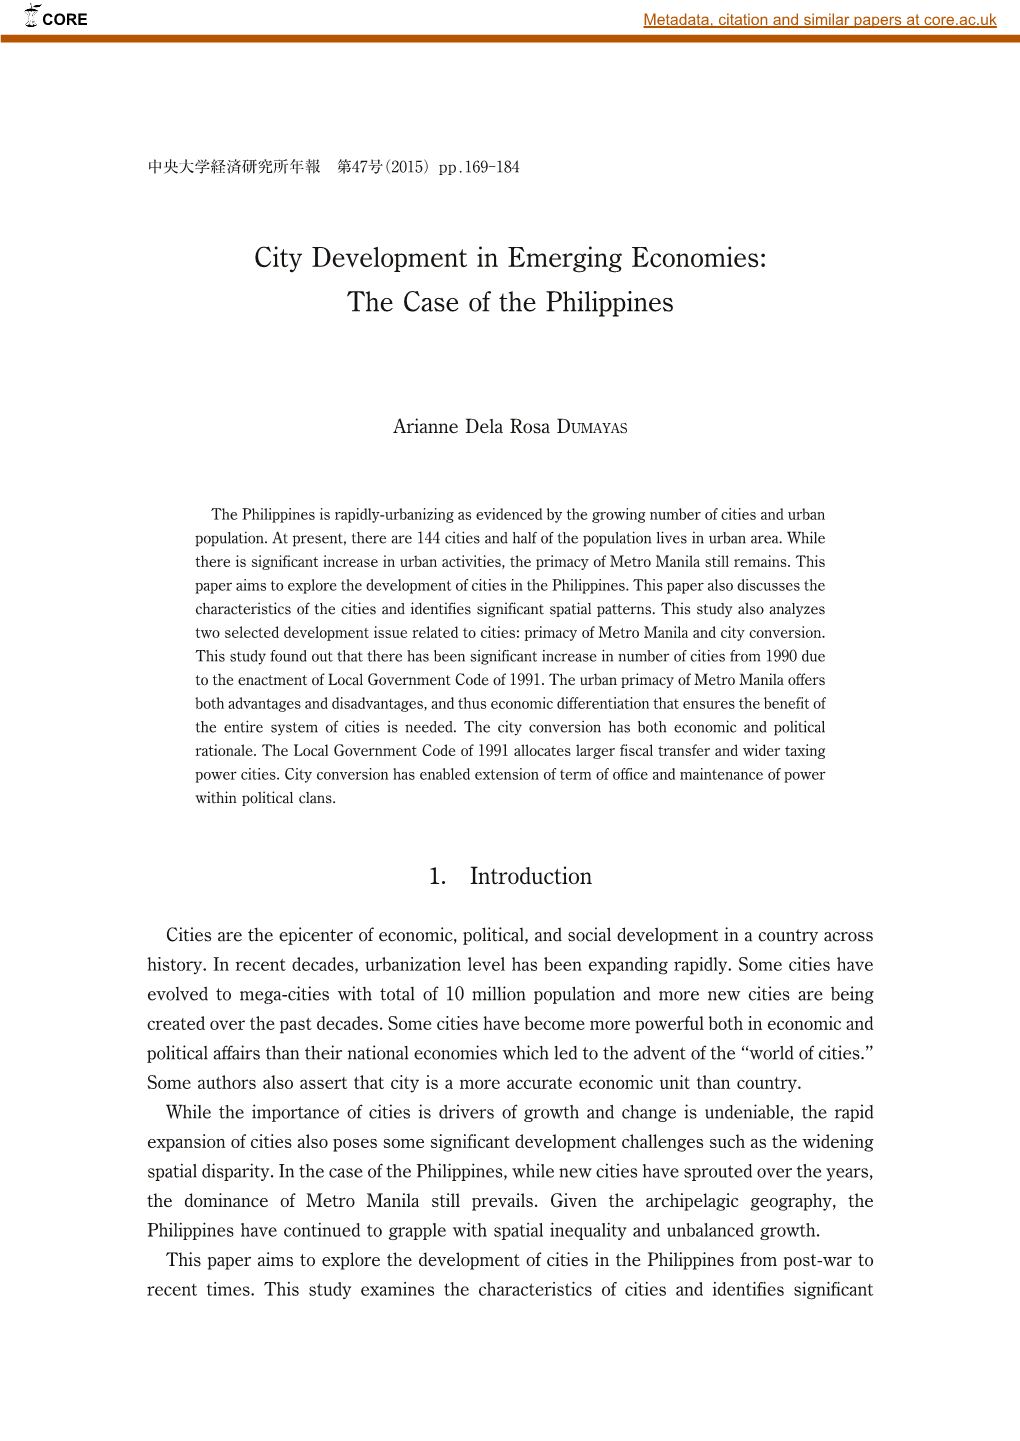 City Development in Emerging Economies: the Case of the Philippines